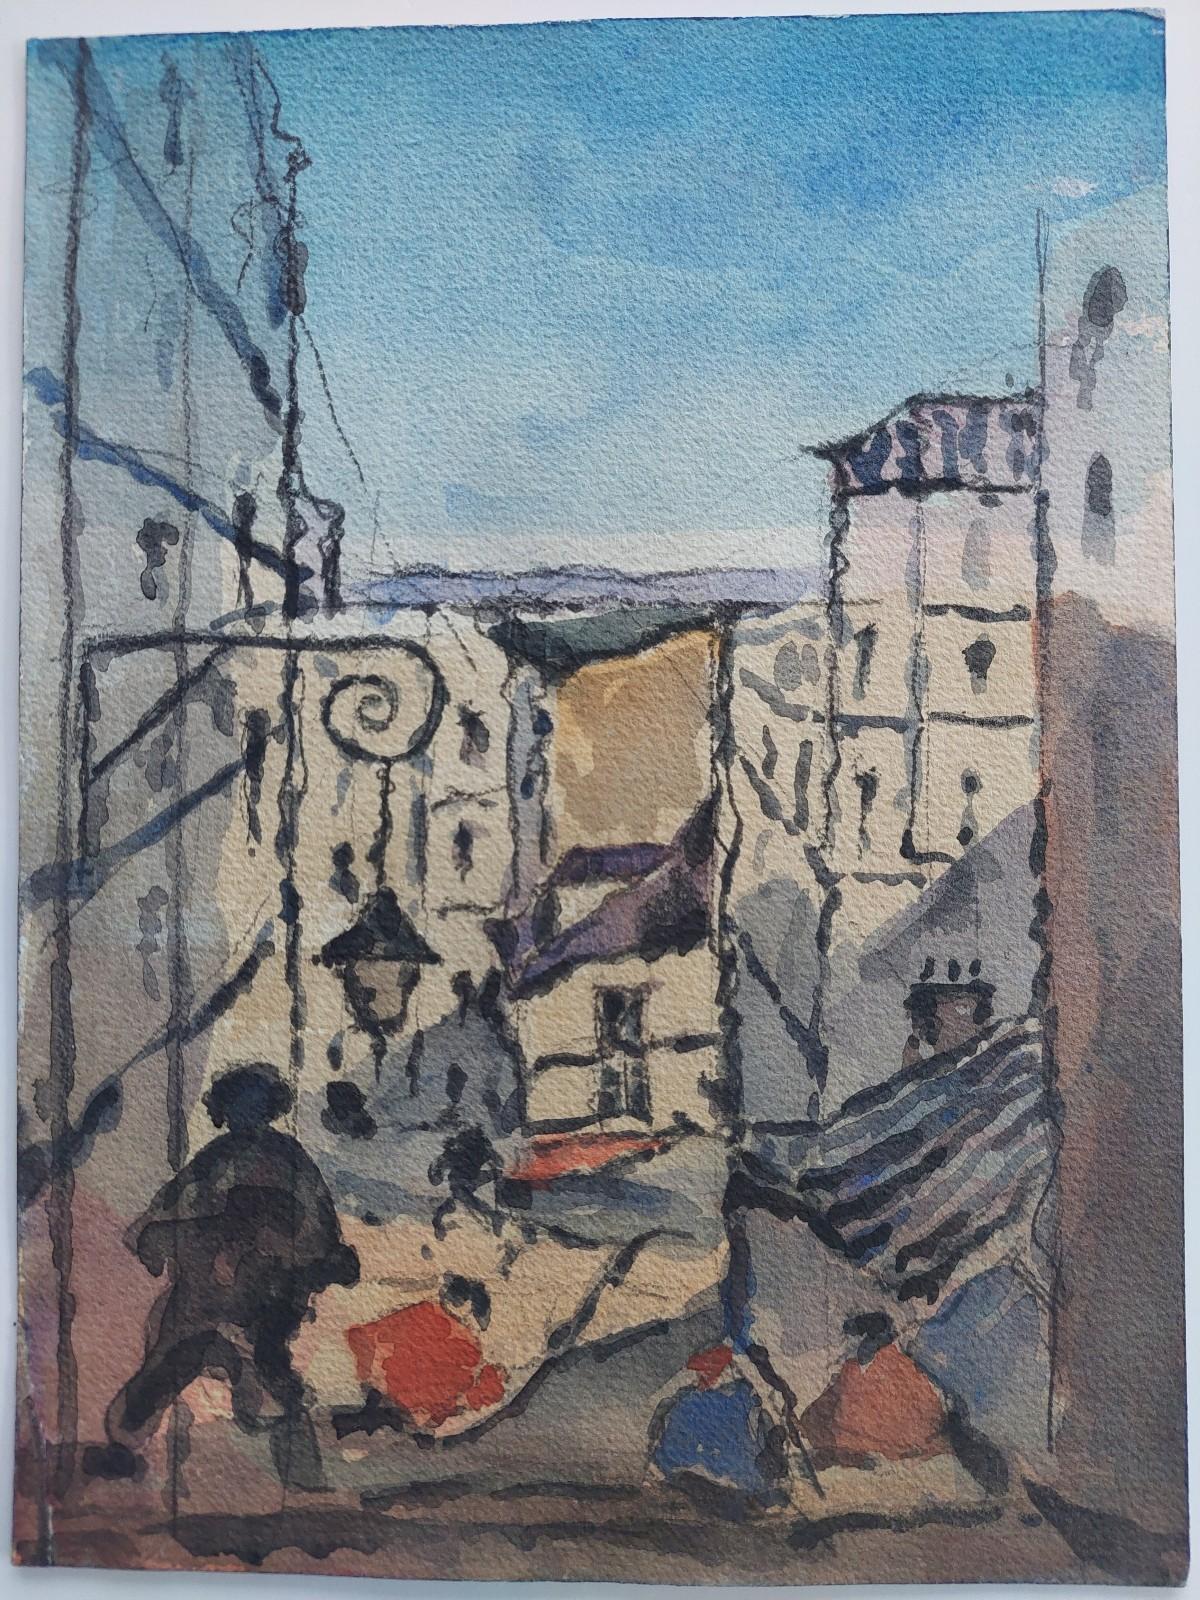 Steps Into The Town, steep stone steps lead figures down amongst town buildings.
by Maurice Mazeilie (French, 1924-2021)
watercolor painting on artist paper, unframed
unsigned to the front but signed verso
stamped verso
A strong and robust